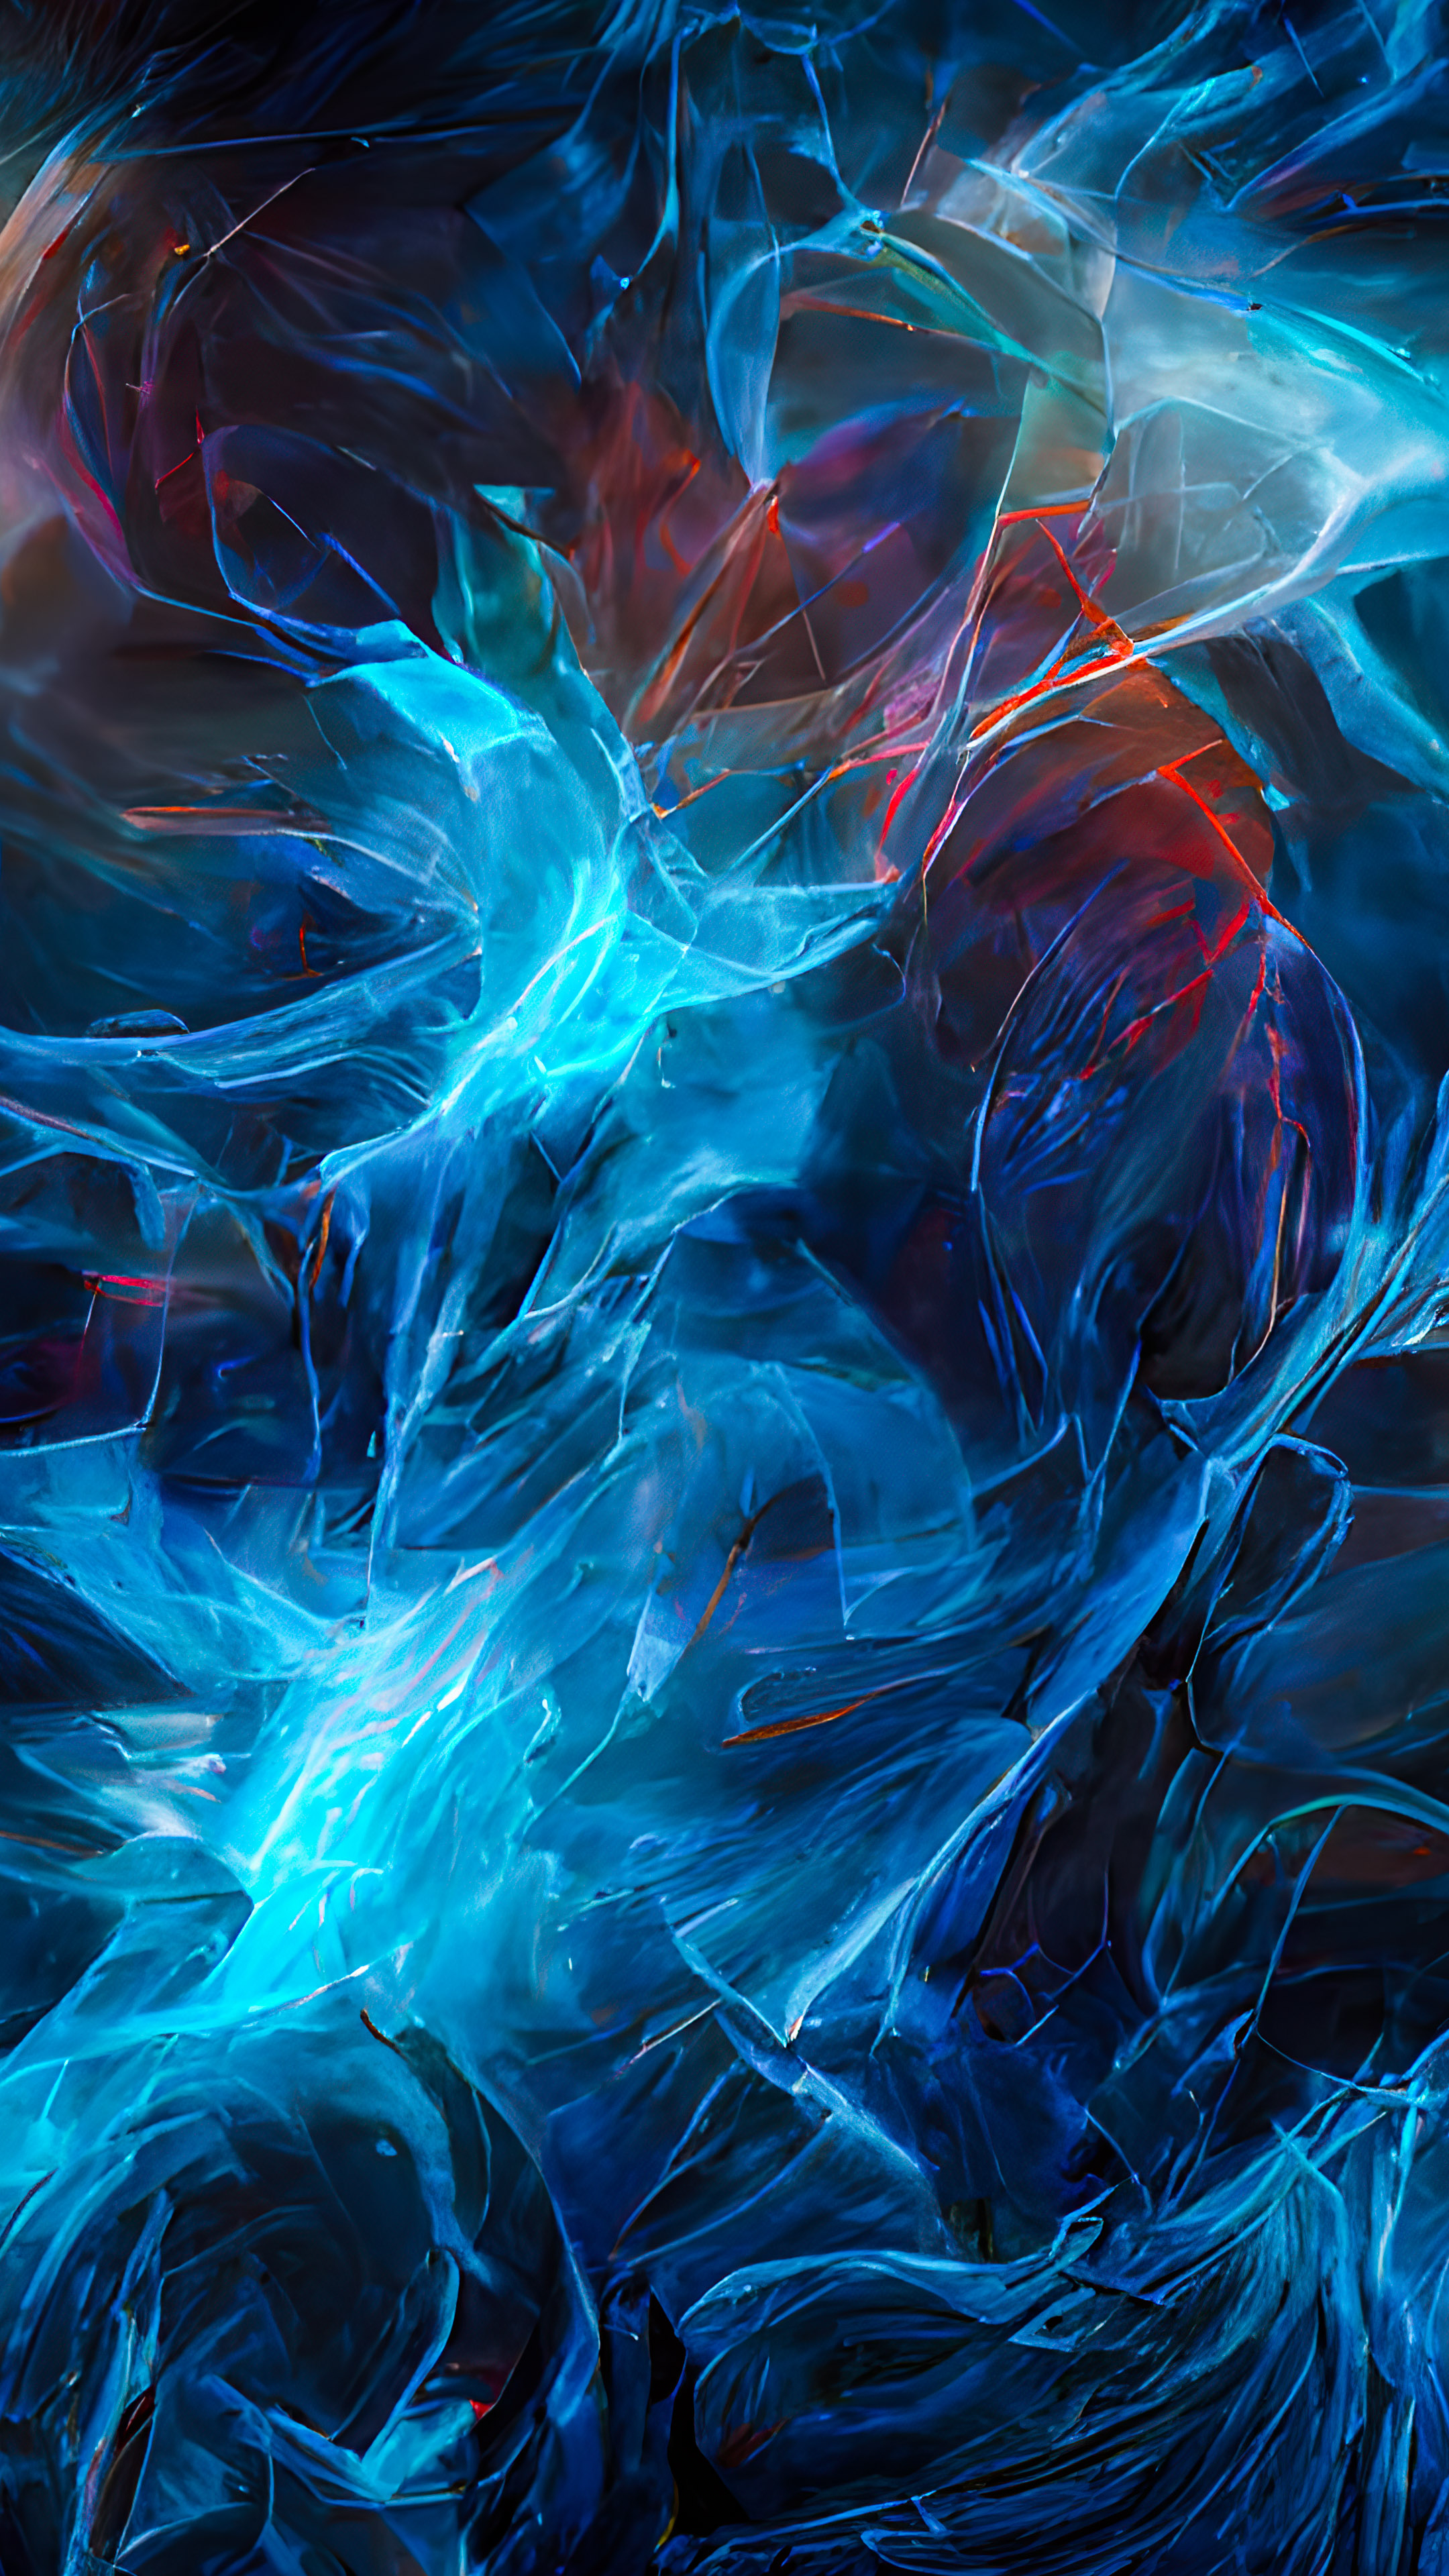 Personalize your device with abstract art wallpaper for phone, where vibrant colors meet mysterious darkness.